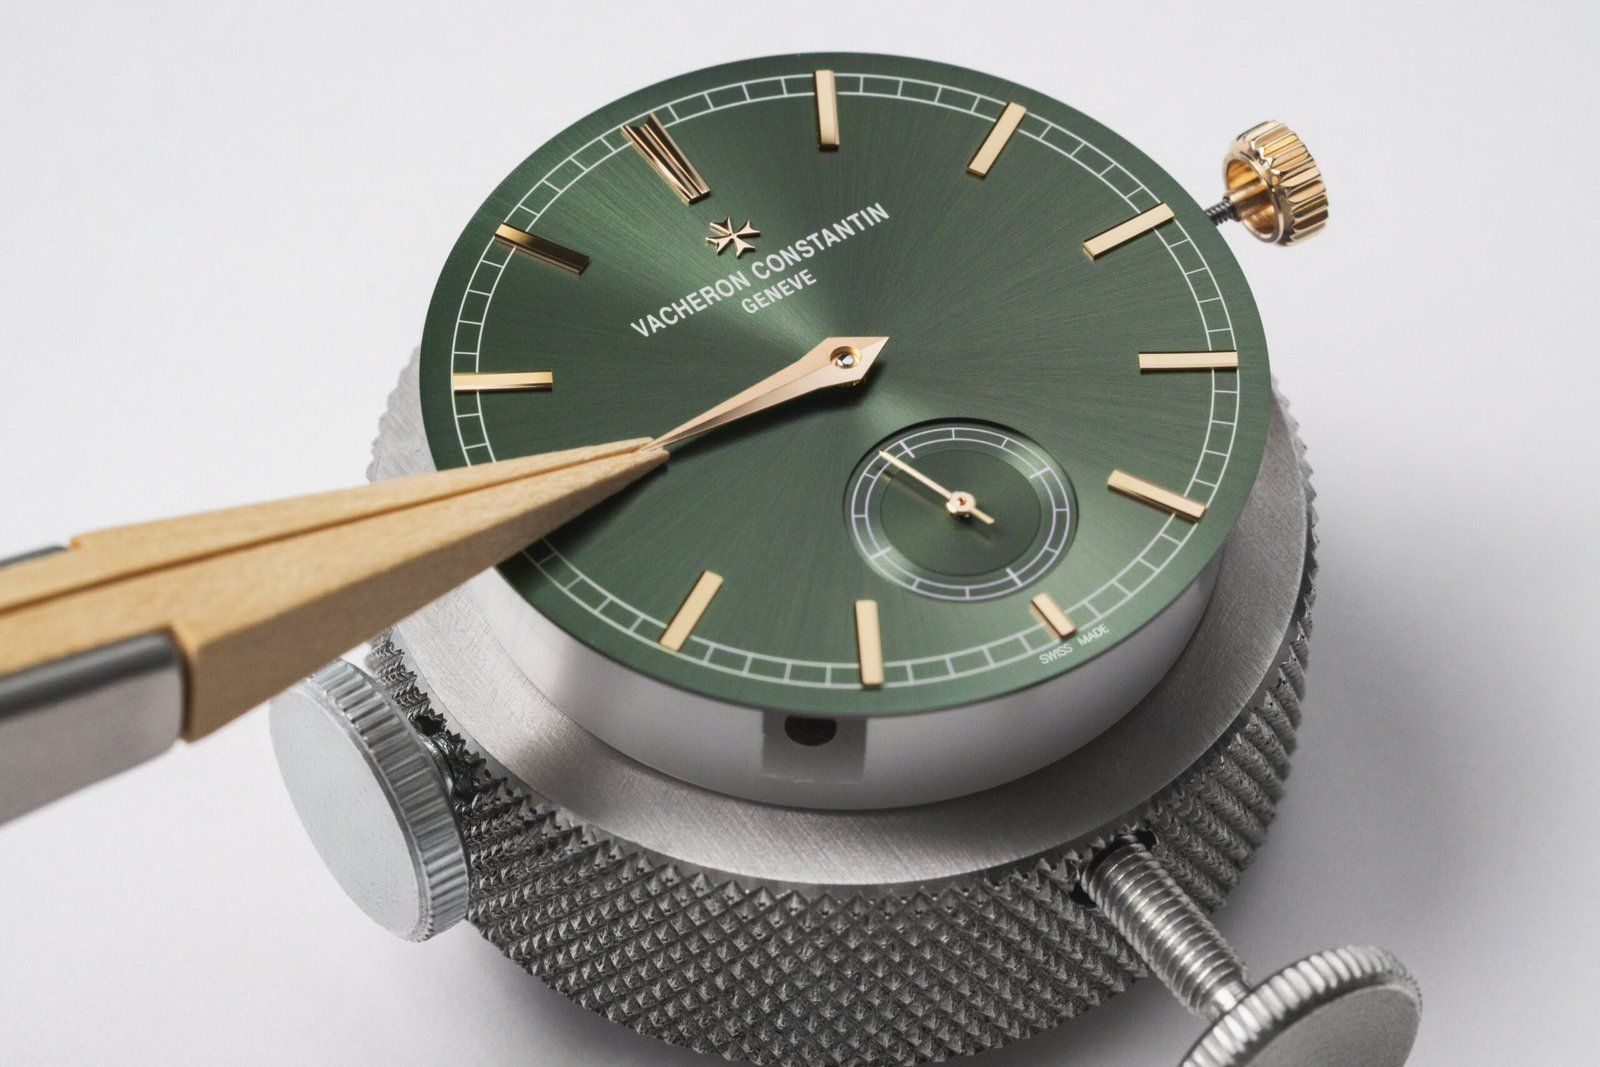 Attention to detail on the latest Traditionnelle manual-winding watches is second to none